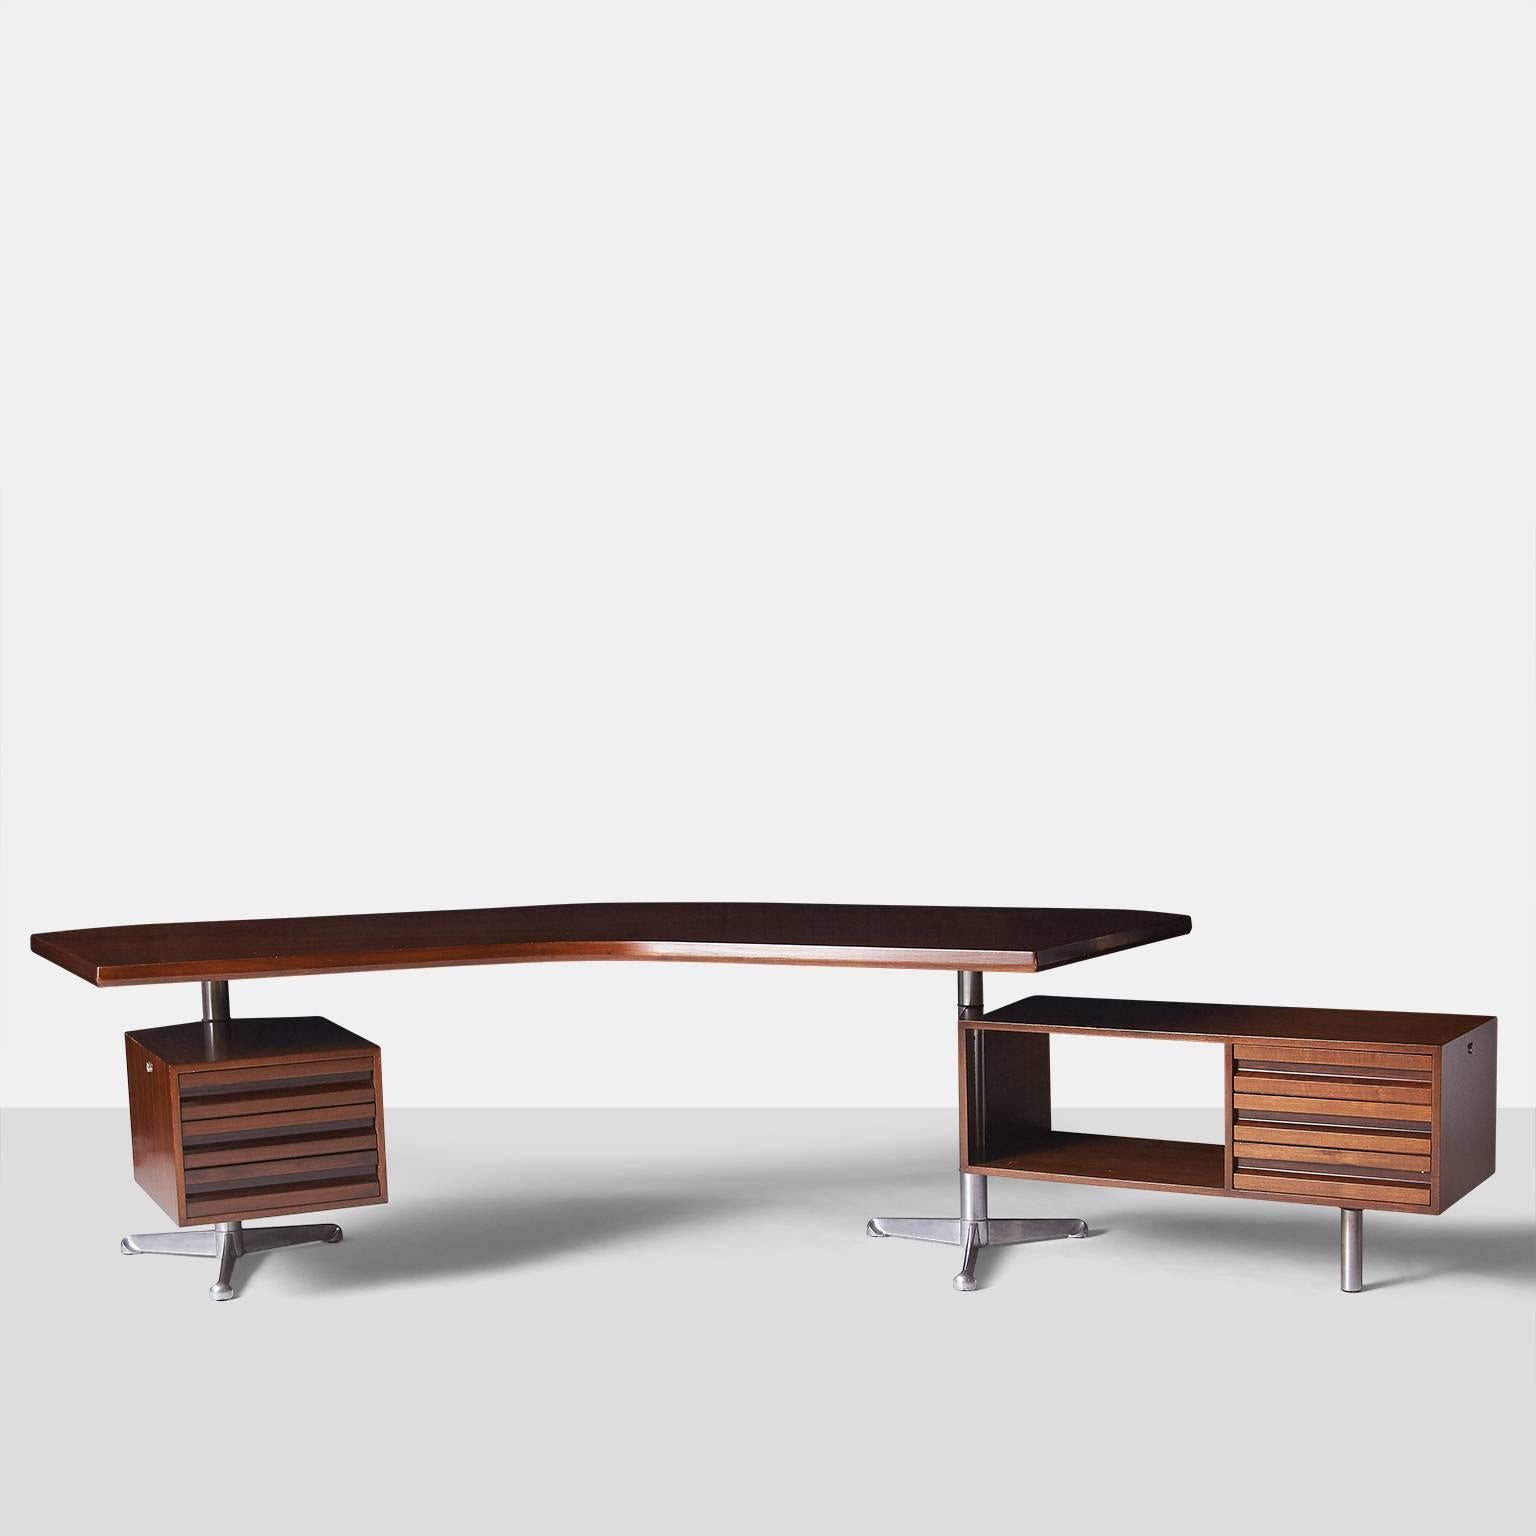 An executive desk made in rosewood and polished aluminum for ENI furnishings and retains the original label, Tecno Milano. The desk has a boomerang shaped top which floats over two tabourets that rotate 180 degrees. Both have three drawers and one